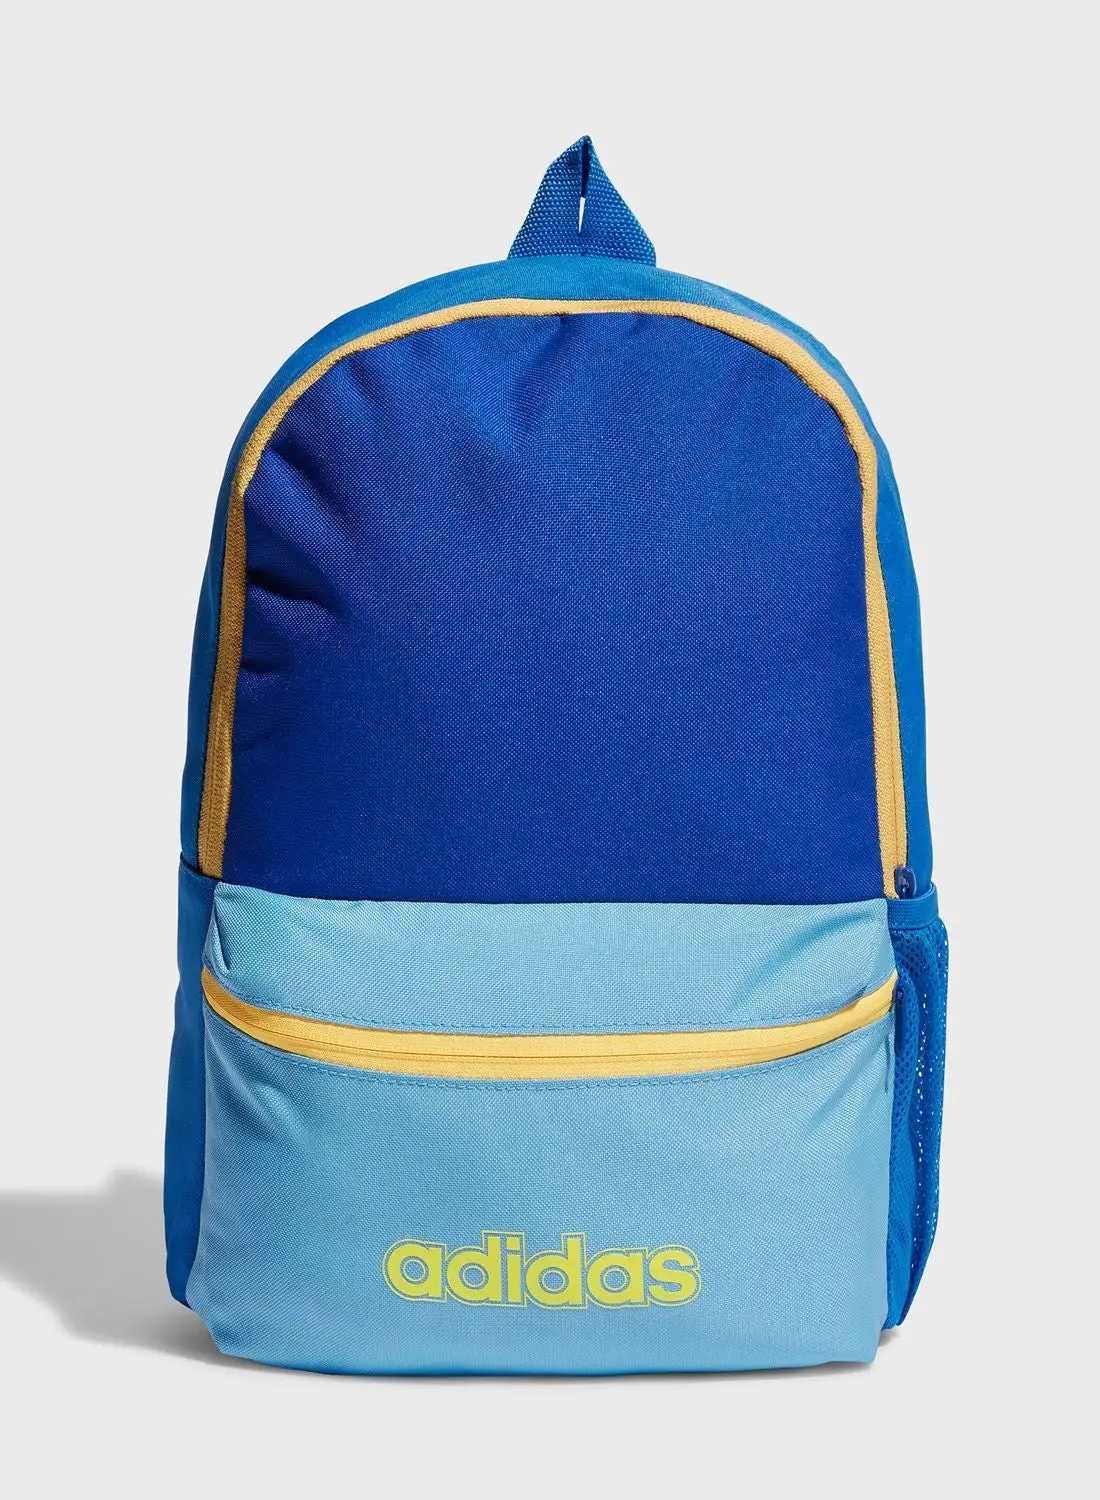 Adidas Little Kids Graphic Backpack